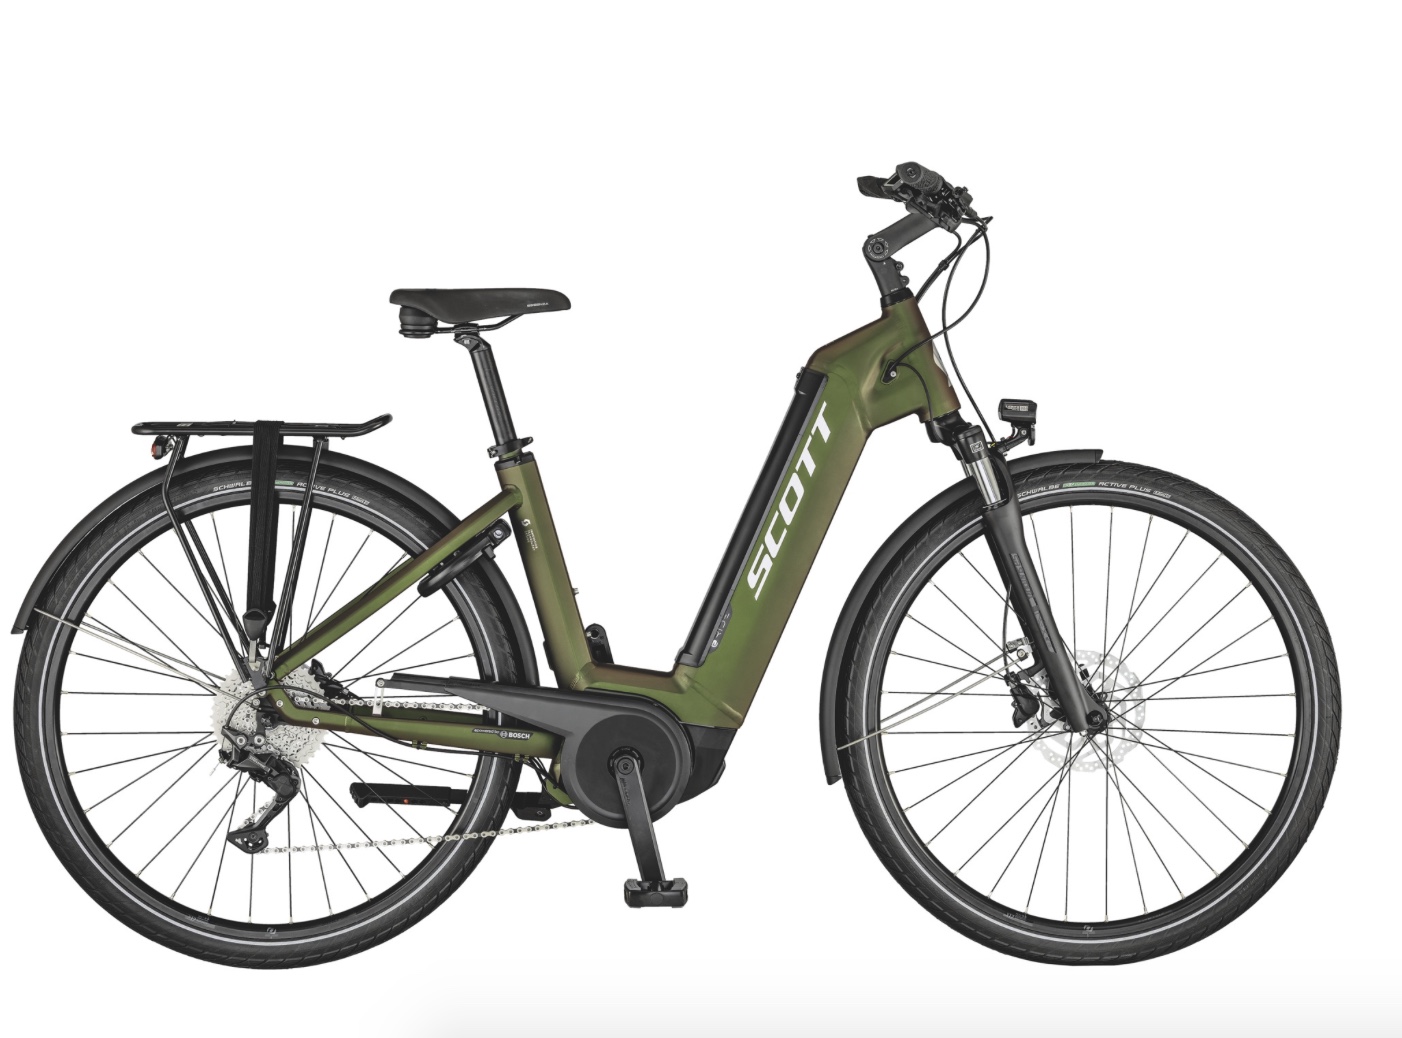 eBike rentals for trips and events.